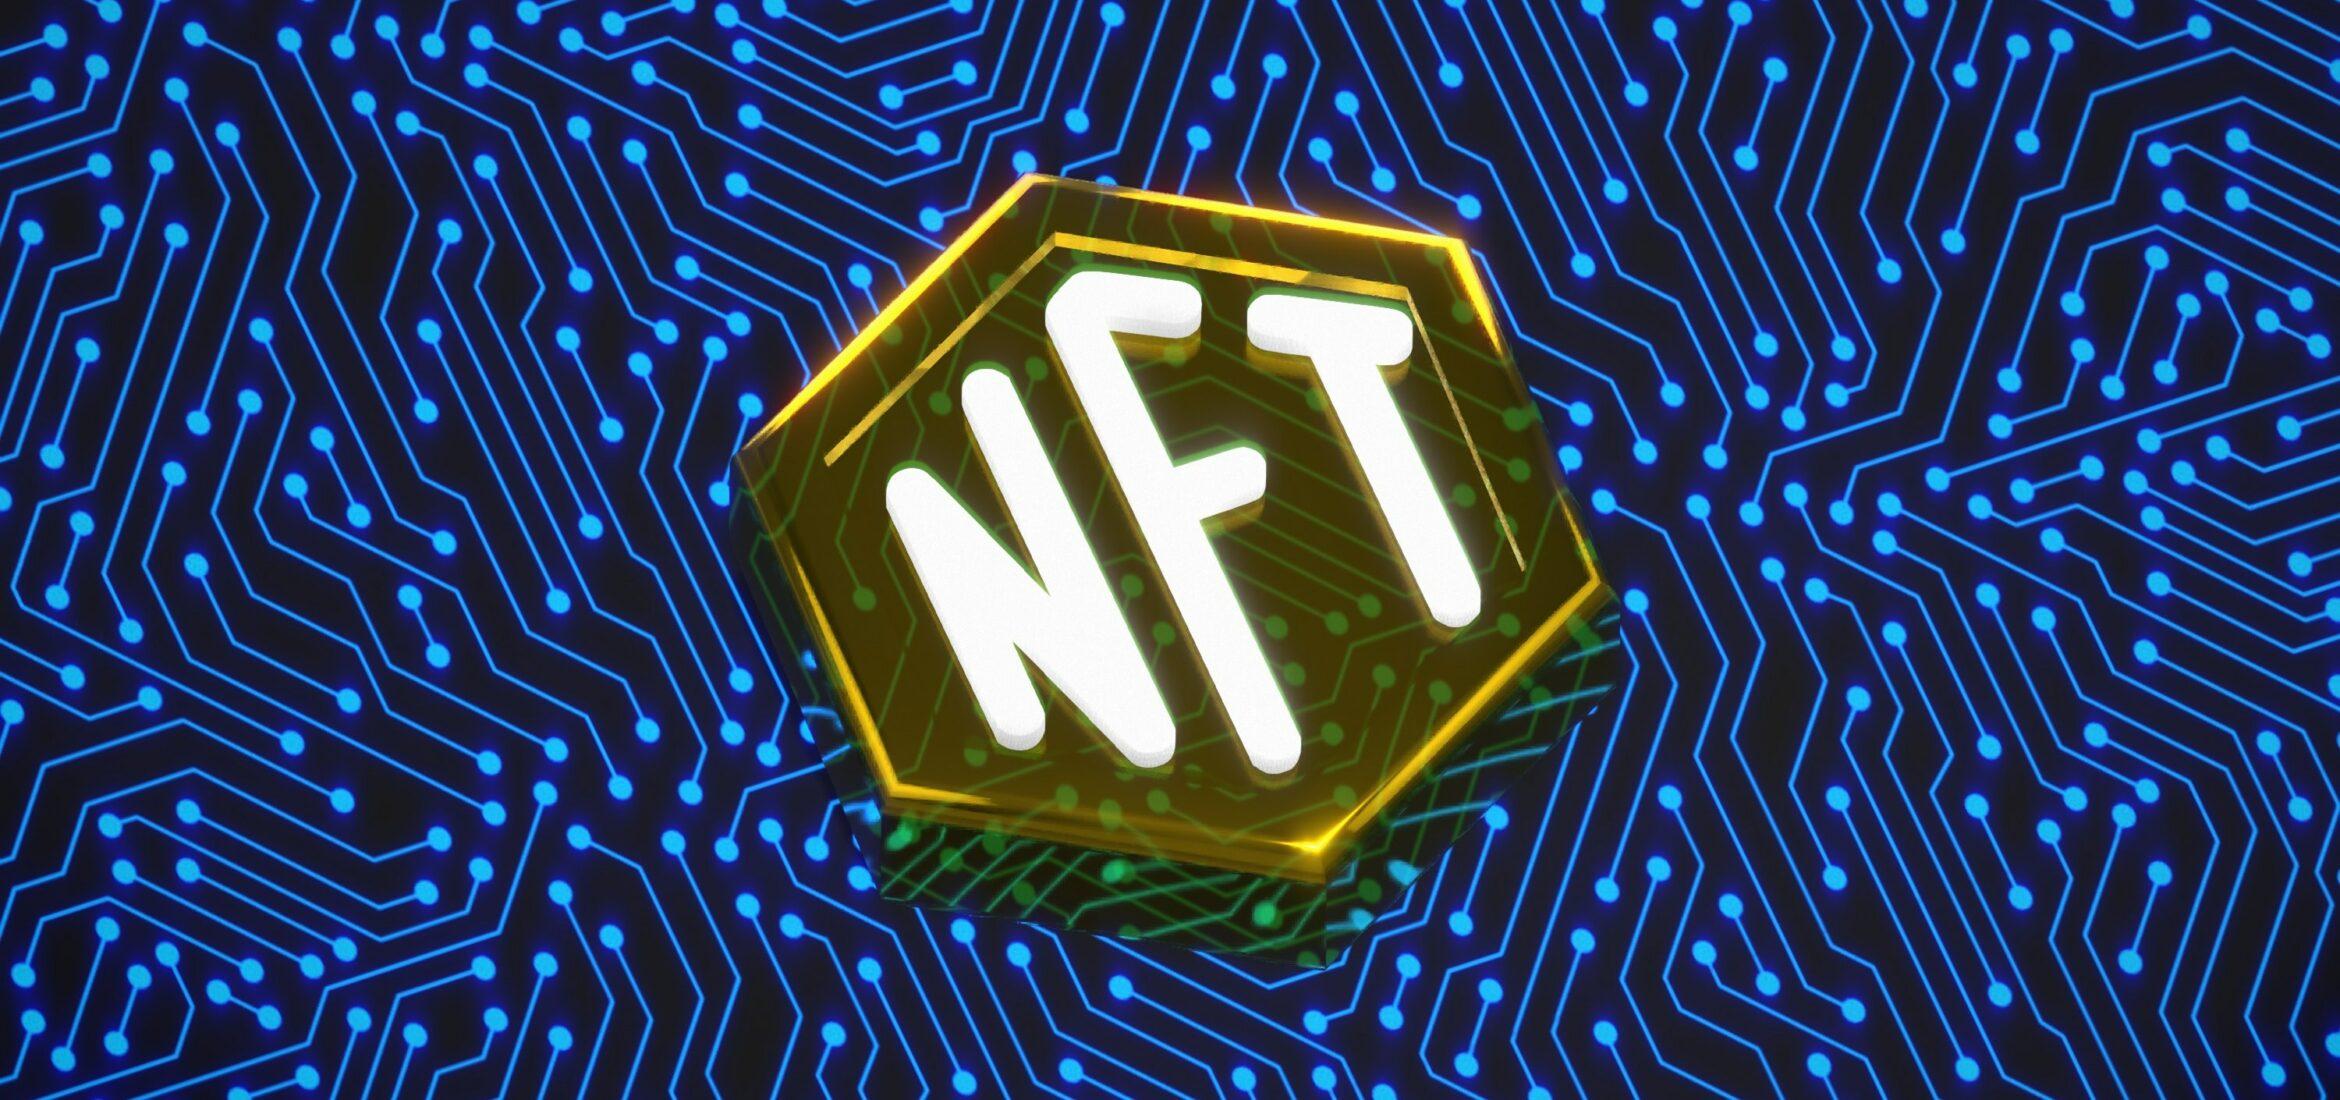 What are Music NFTs? Are NFTs the future of Music?